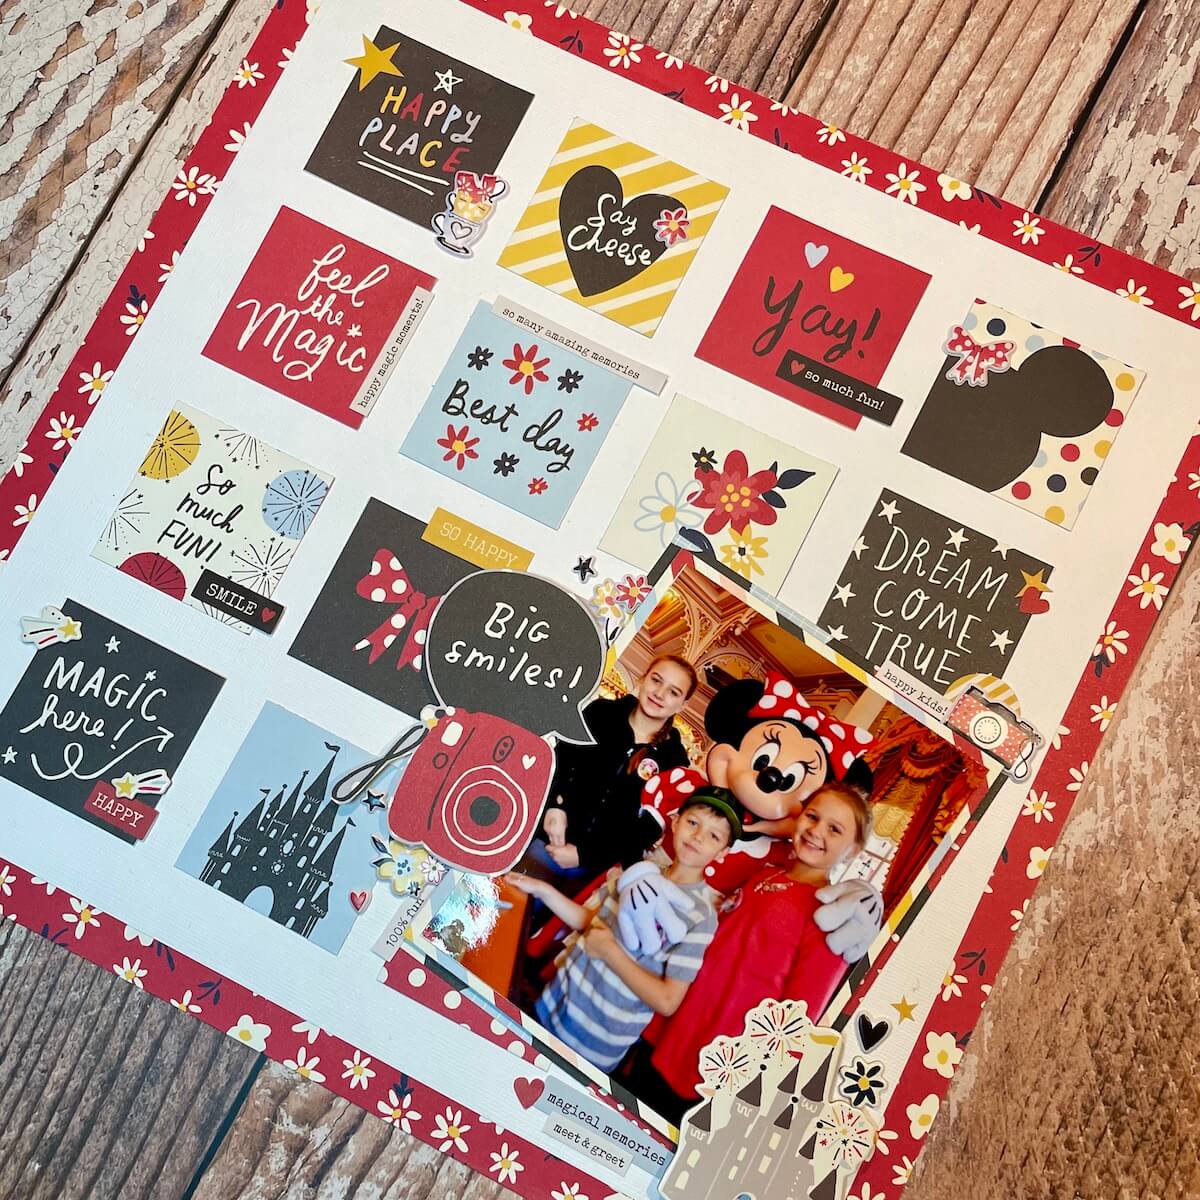 A grid design layout featuring a MInnie meet and greet at Disneyland.